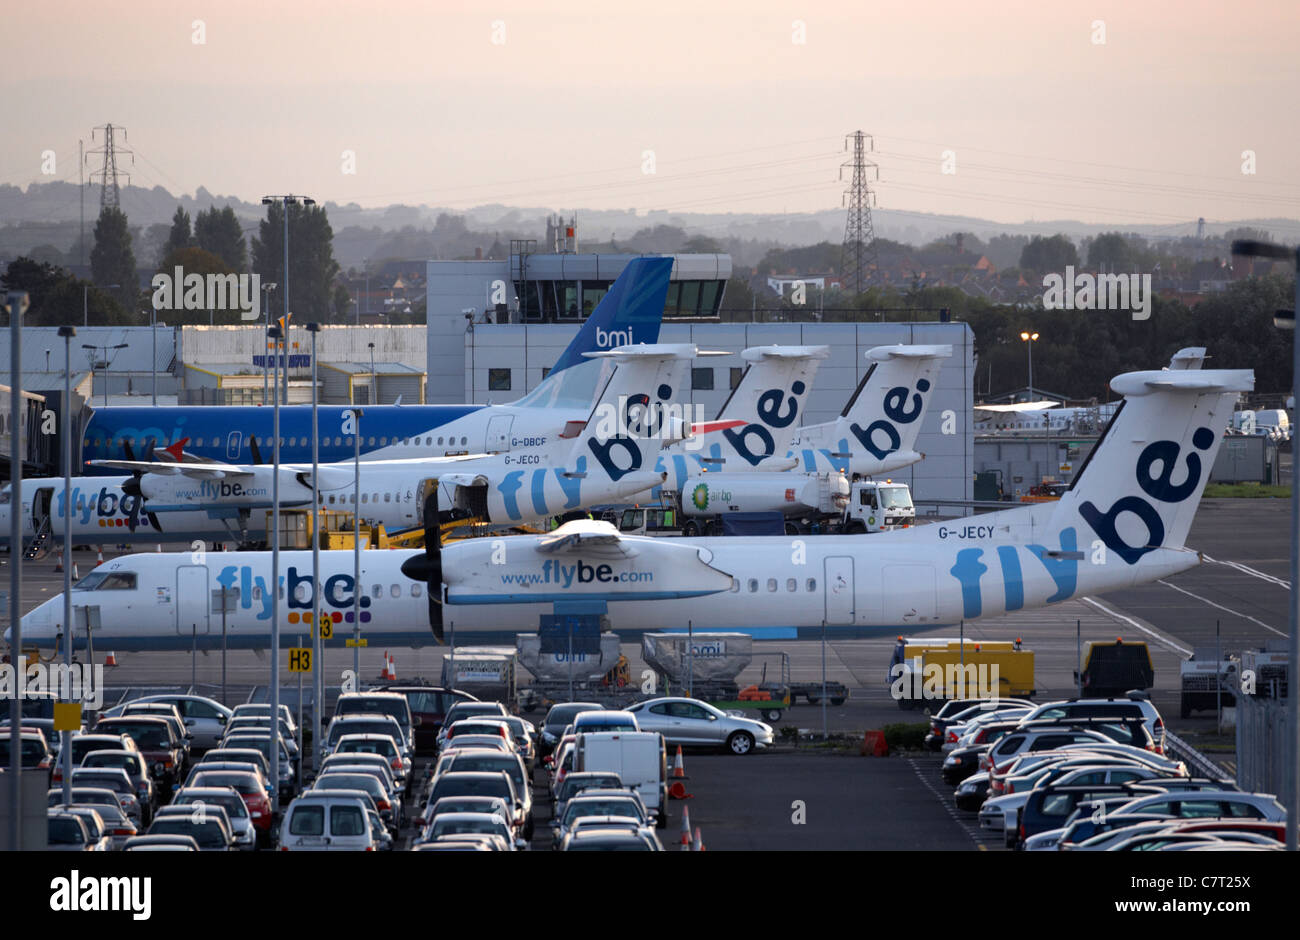 row of flybe aircraft parked on the tarmac at George Best Belfast City Airport, Belfast, Northern Ireland, UK. Stock Photo